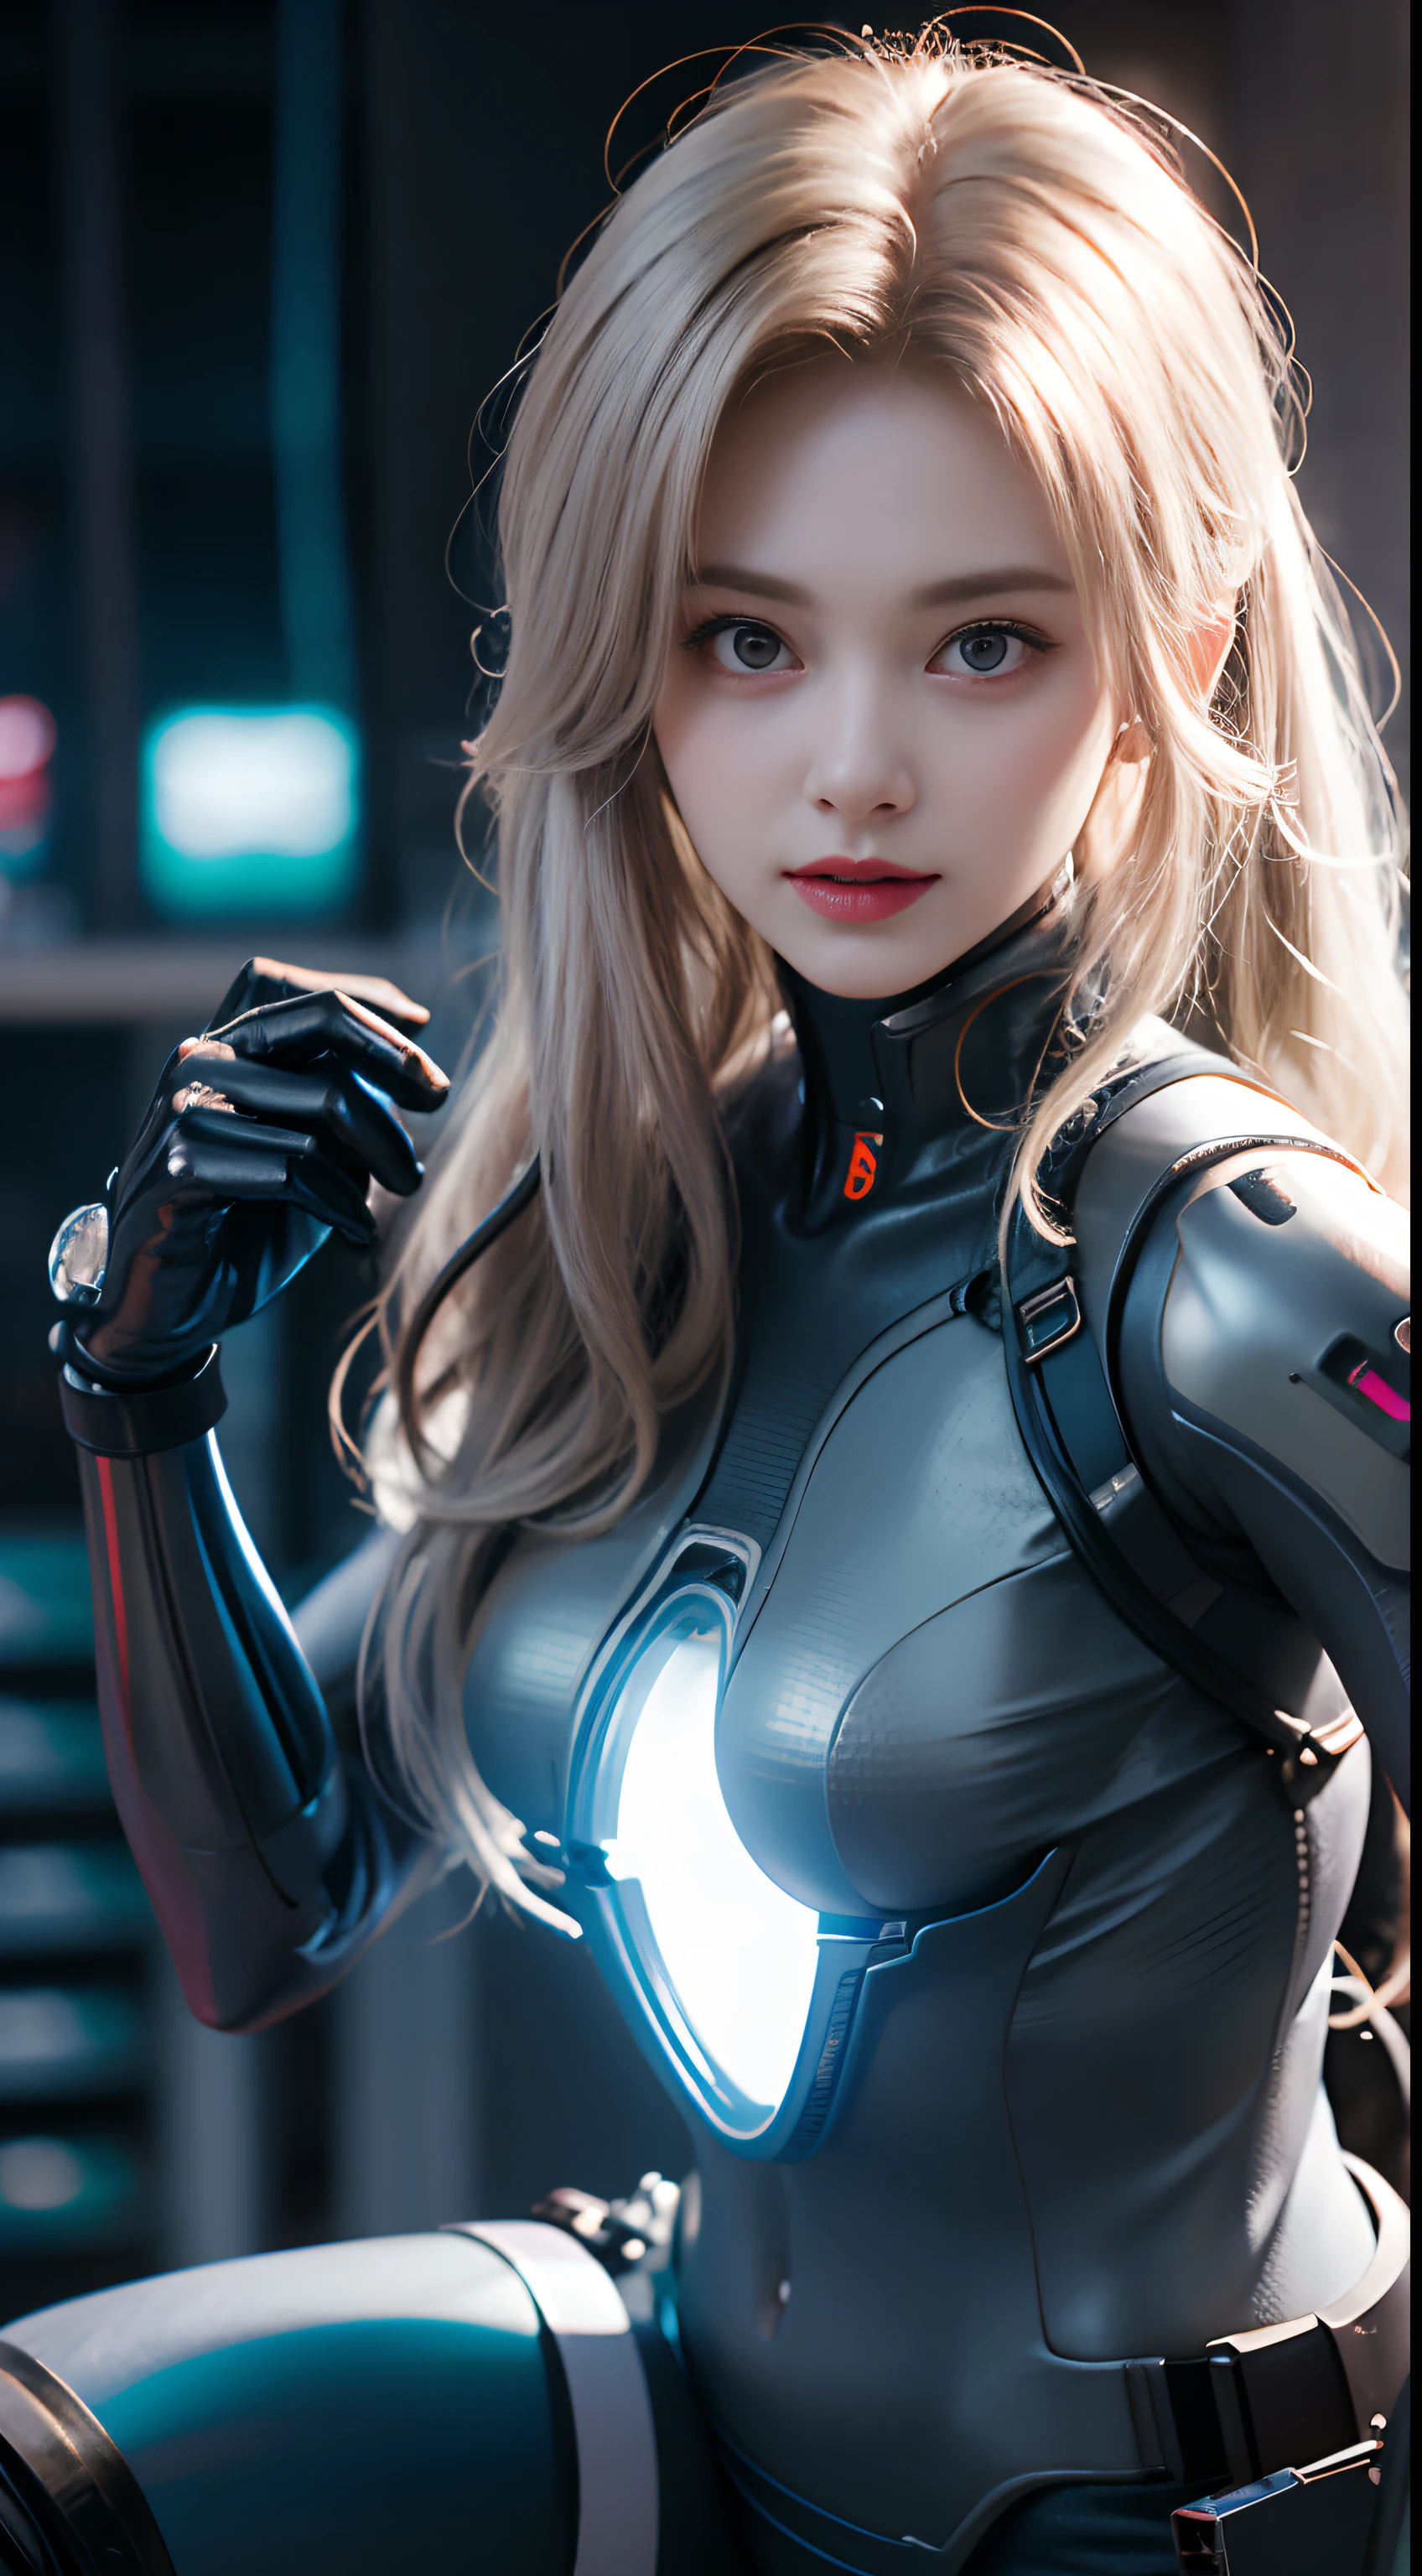 ((Best quality)), (Masterpiece)), (Details:1.4), Beautiful cyberpunk woman image,hdr,HighDynamicRange),Ray tracing,NVIDIA RTX,Super resolution,Unreal 5,Subsurface scattering,PBR Texture,Post-processing,Anisotropic filtering,Depth of field,Maximum clarity and sharpness,Many-Layer Textures, Albedo and specular maps, Surface coloring, Accurate simulation of light-material interactions, Perfect proportions, Octane rendering, Two-tone lighting, Wide aperture, Low ISO, White balance, Rule of thirds, 8K raw data, Otherworldly